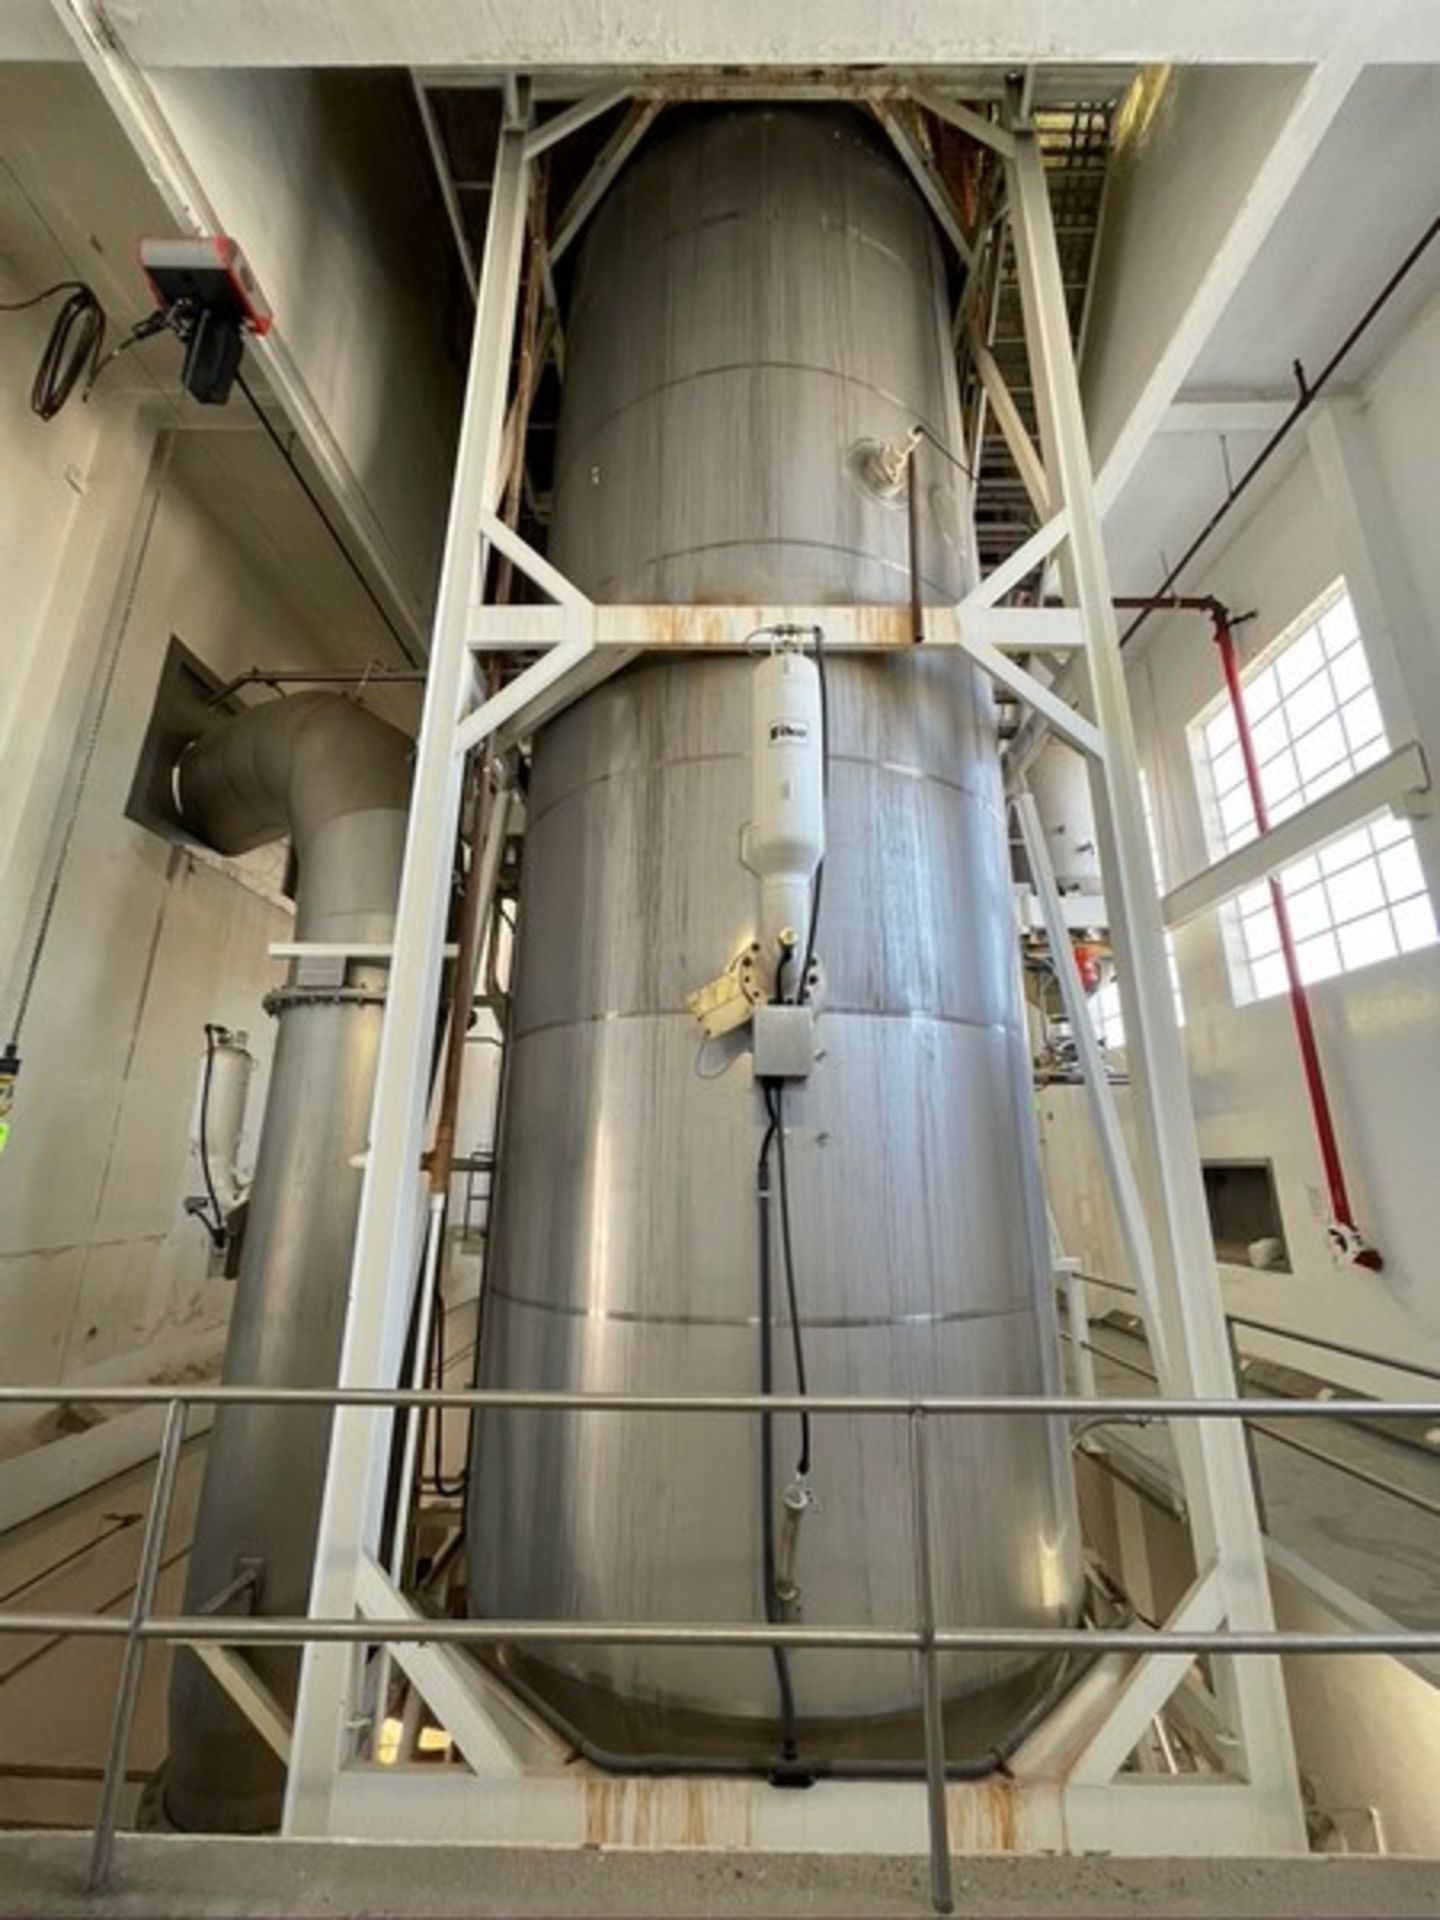 GEA NIRO BSI Approx. 40 ft H x 10 ft W S/S Tower Dryer with Natural Gas Burner, Associated Duct - Image 47 of 47